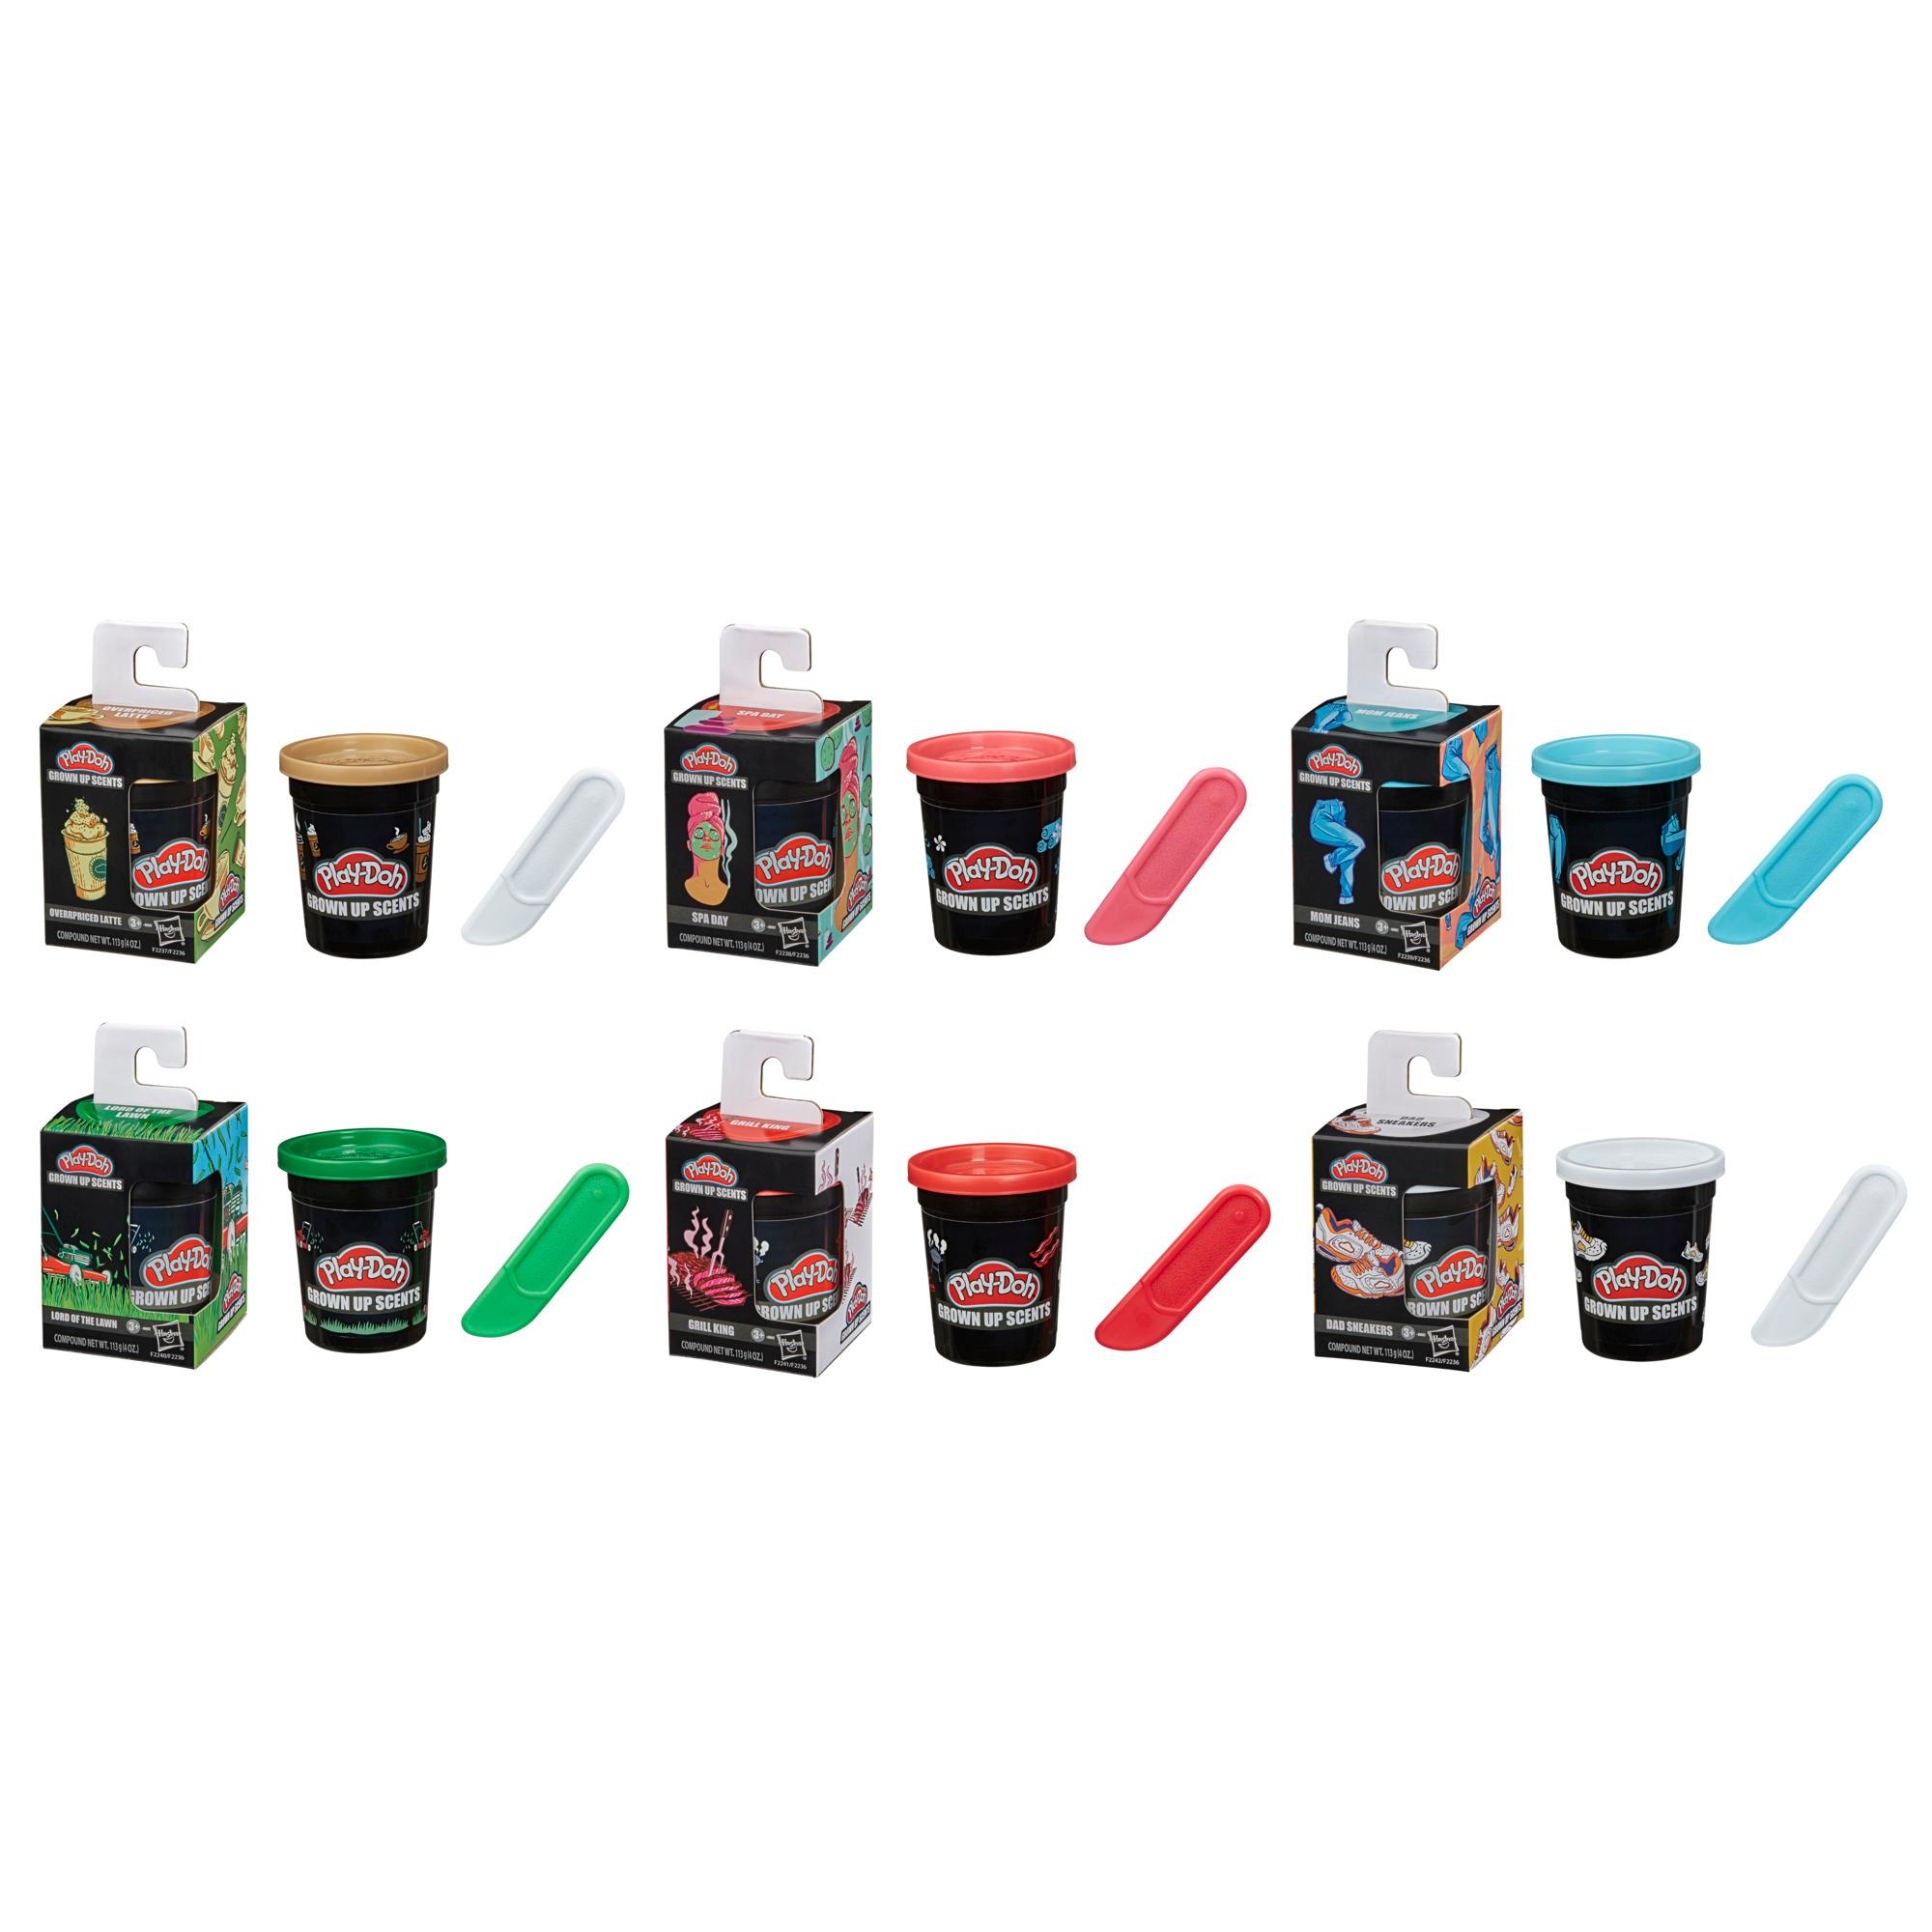 Play-Doh Grown Up Scents Multipack of Scented Modeling Compound for Adults, 6 Assorted Colors